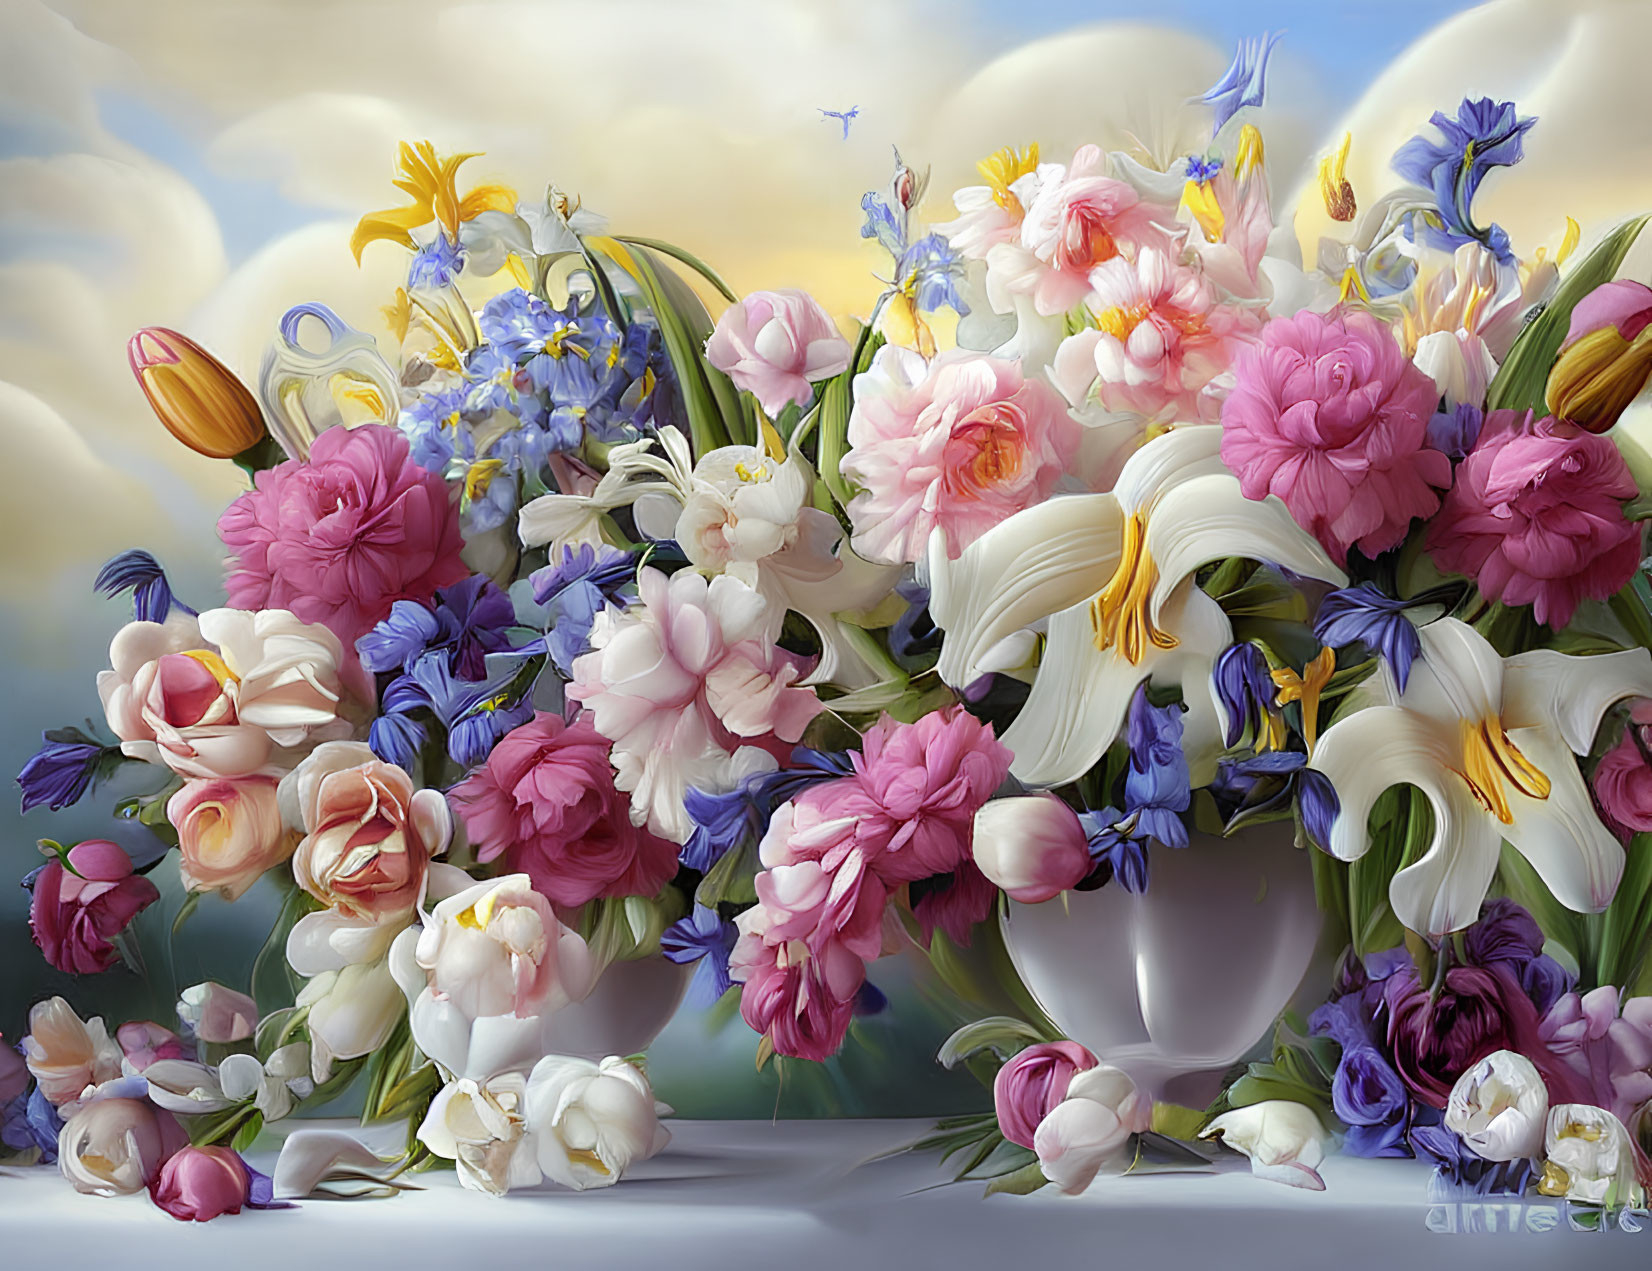 Assorted Full Bloom Flowers in White Vase on Cloudy Sky Background